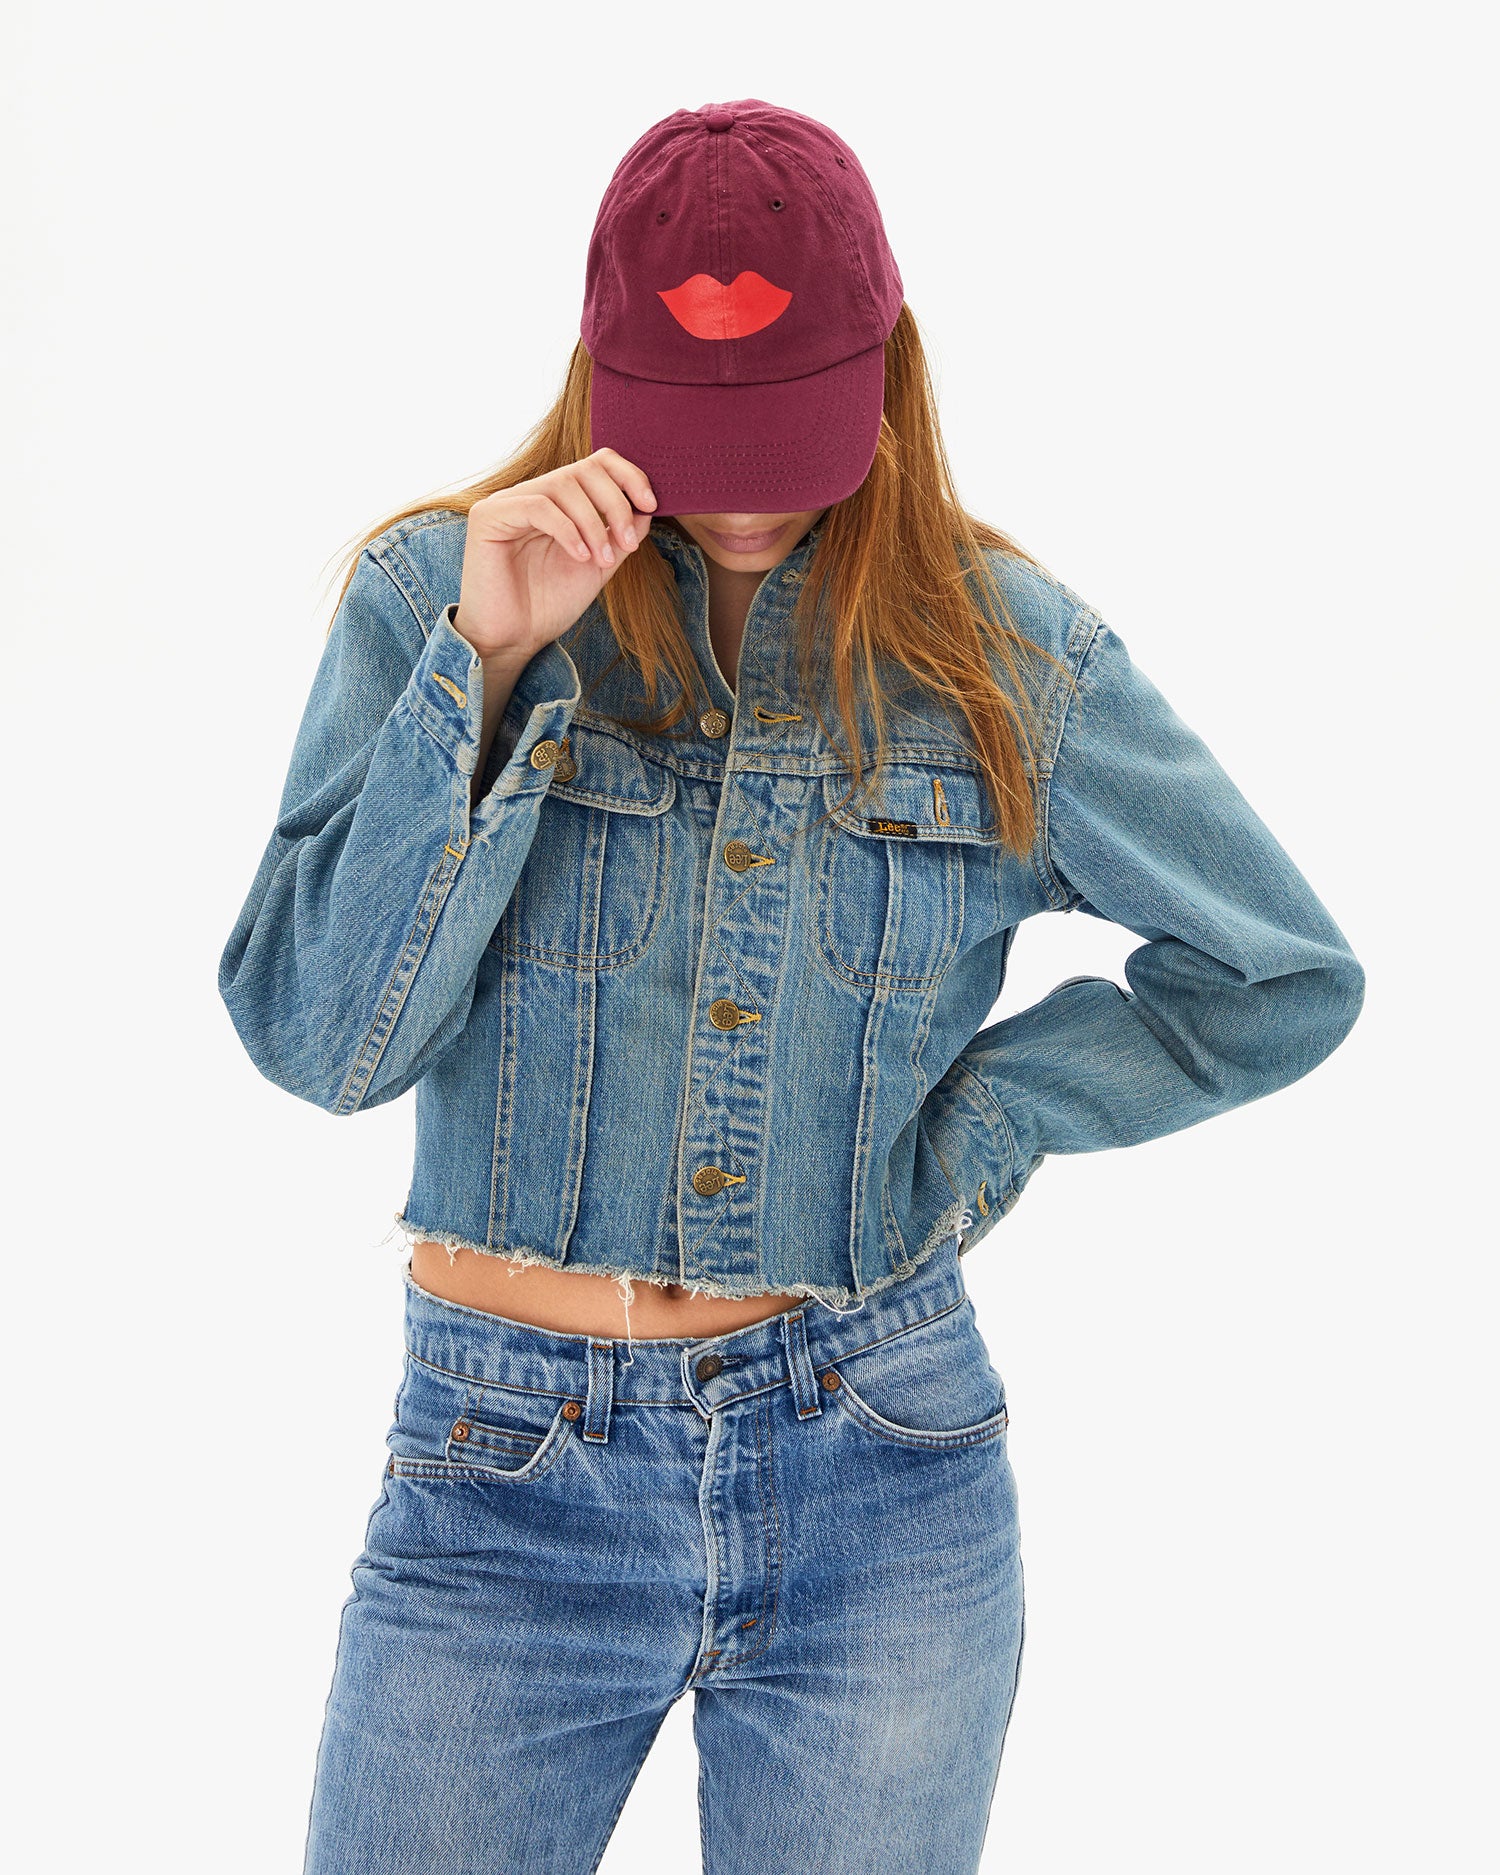 Aurelia touching the brim of the Oxblood with Lips Baseball Hat